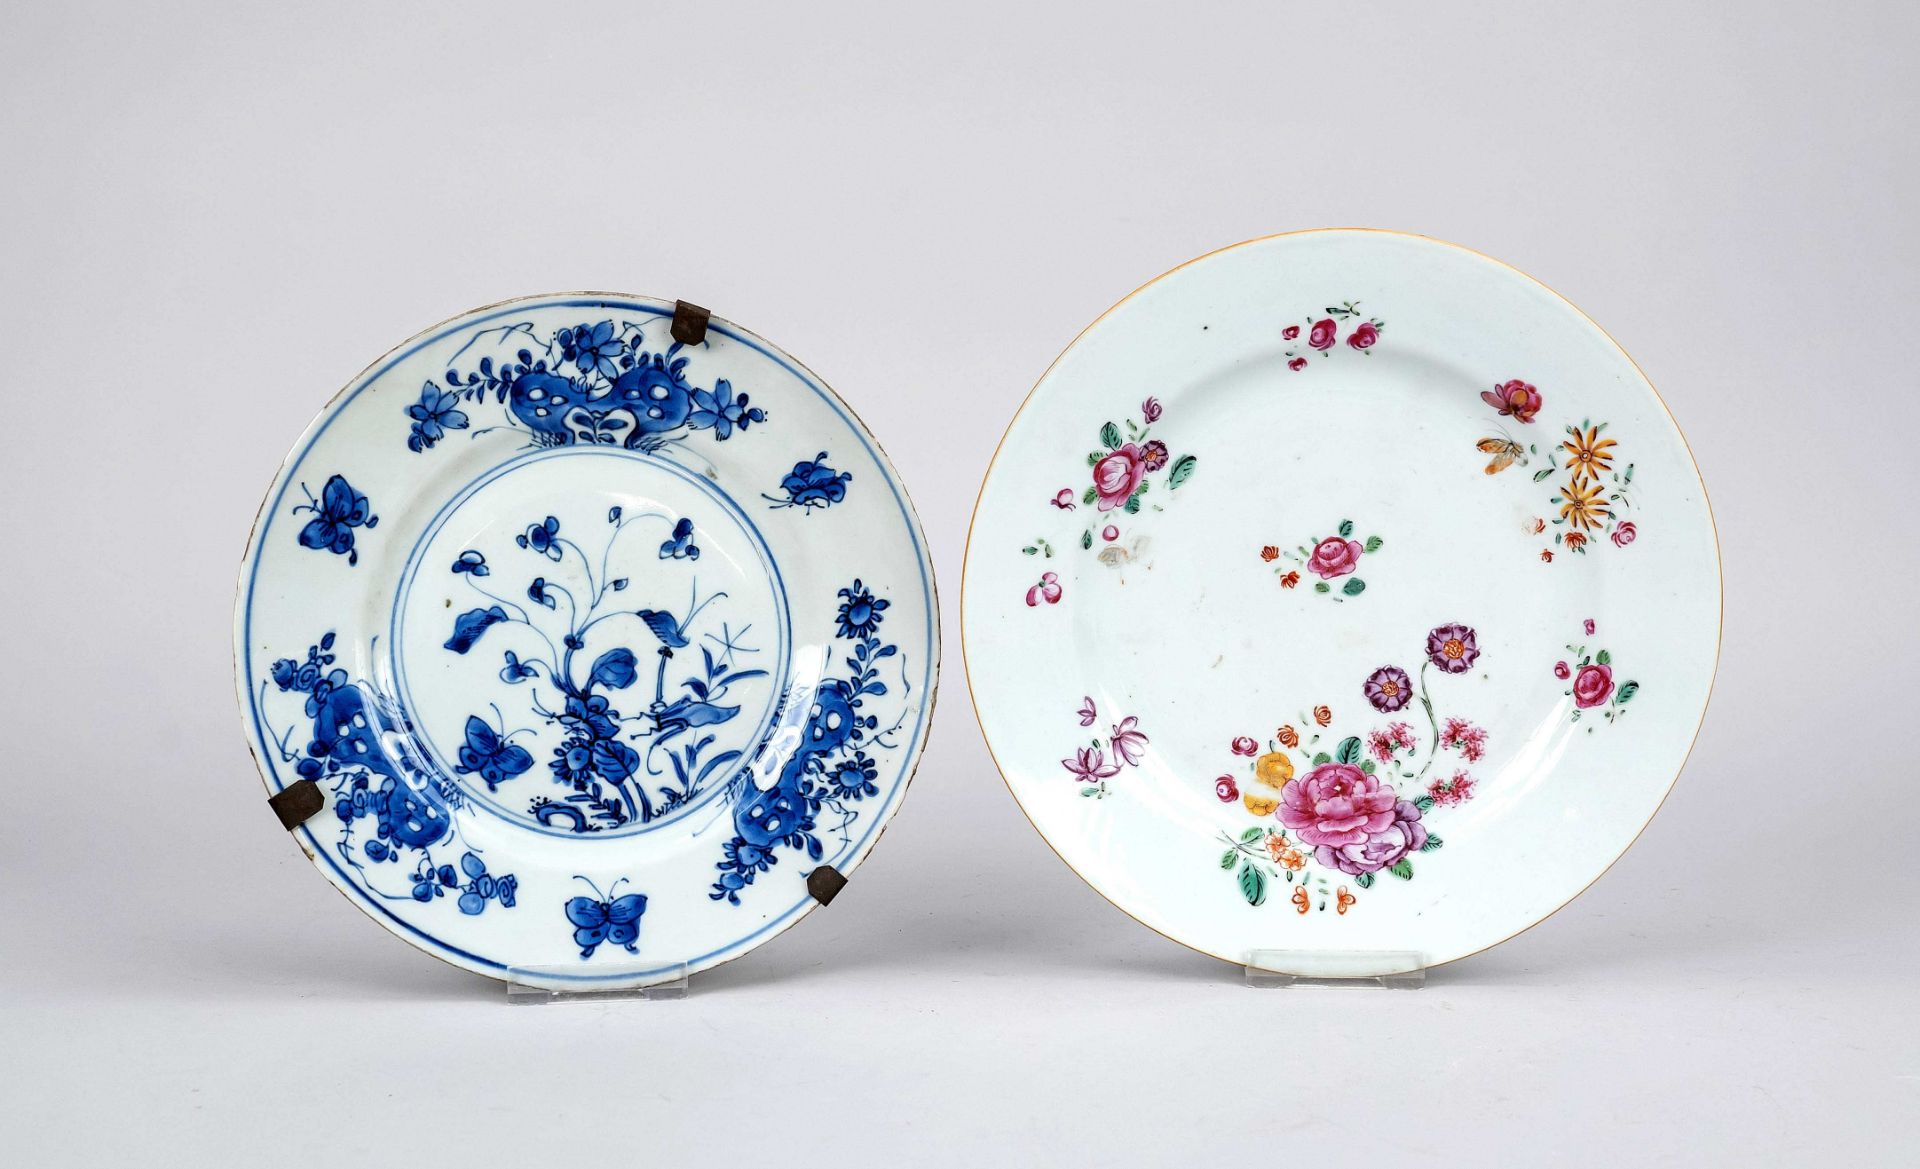 2 plates, China, Qing dynasty(1644-1911), 18th century, porcelain with cobalt blue and polychrome